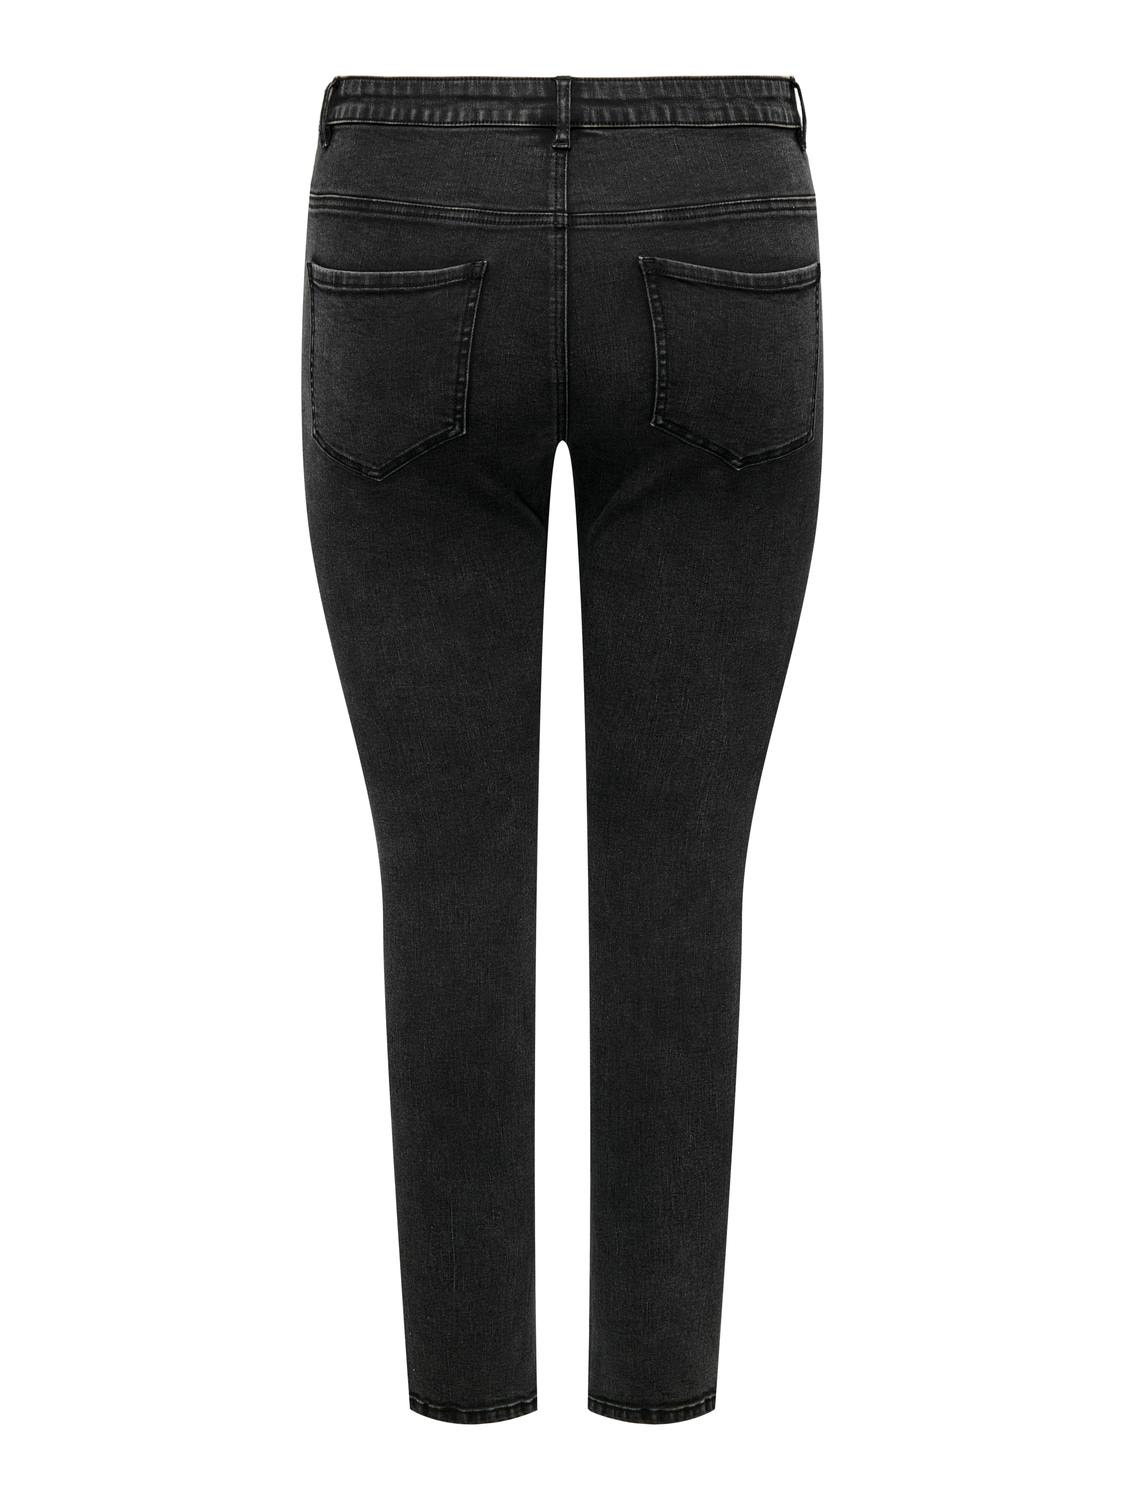 ONLY Skinny Fit High waist Jeans -Washed Black - 15308803